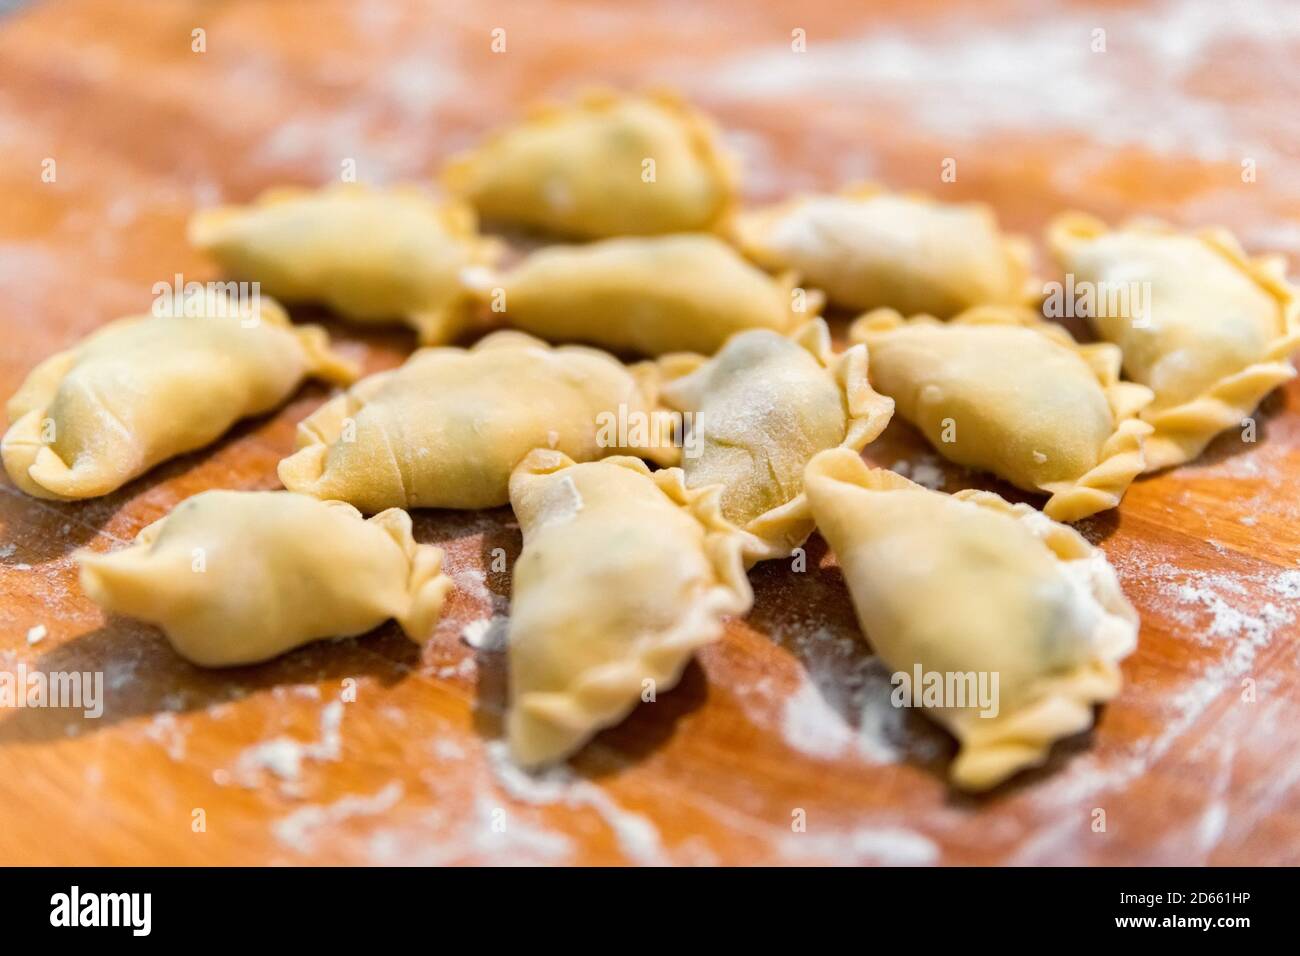 Close-up of perogies from raw dough covered with flour on a wooden cutting board Stock Photo